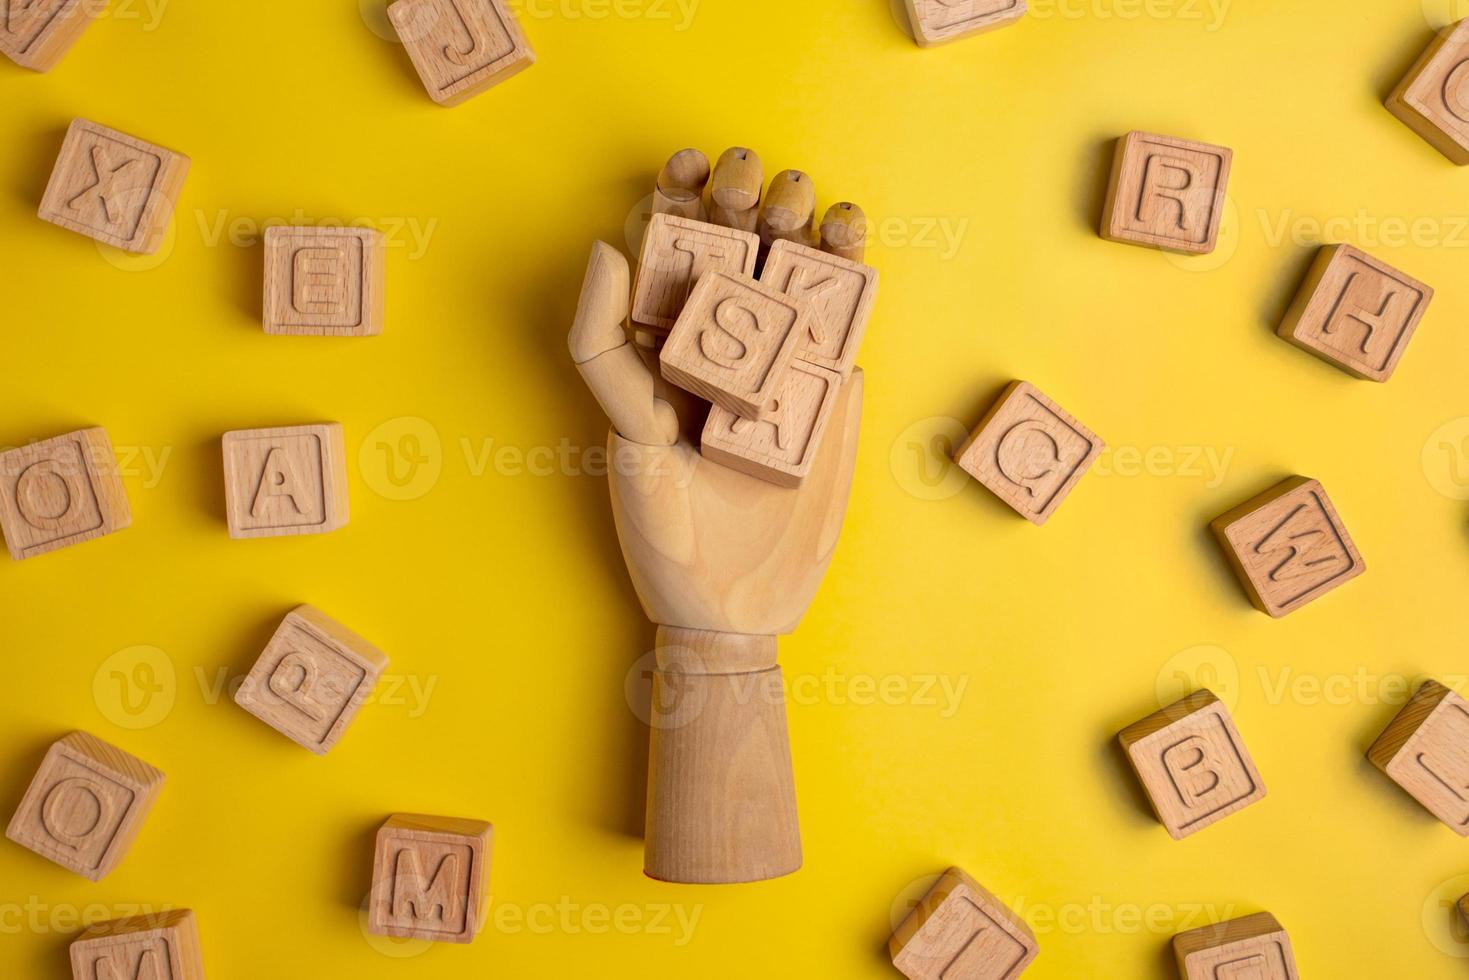 Wooden cubs with letters for words in wood hand on yellow background. Business and study concept photo